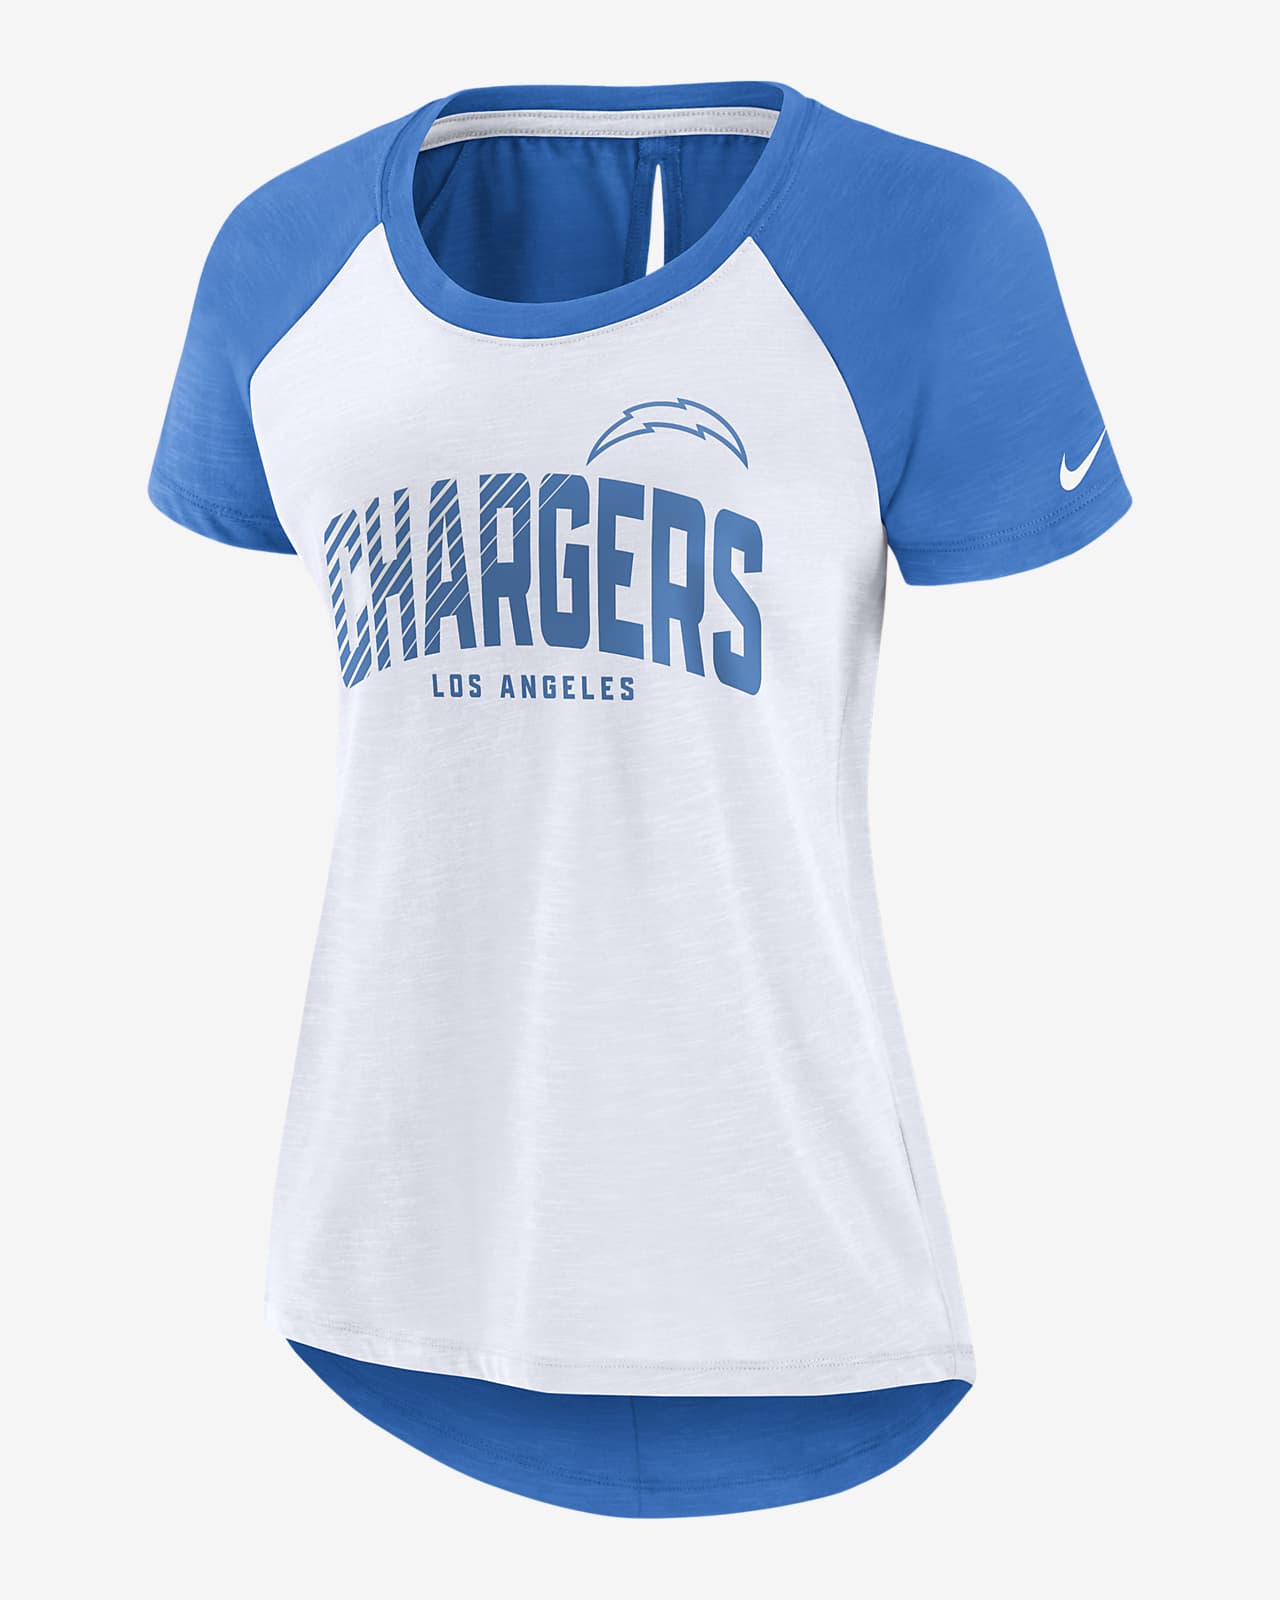 Los Angeles Chargers Fashion Women's Nike NFL Top